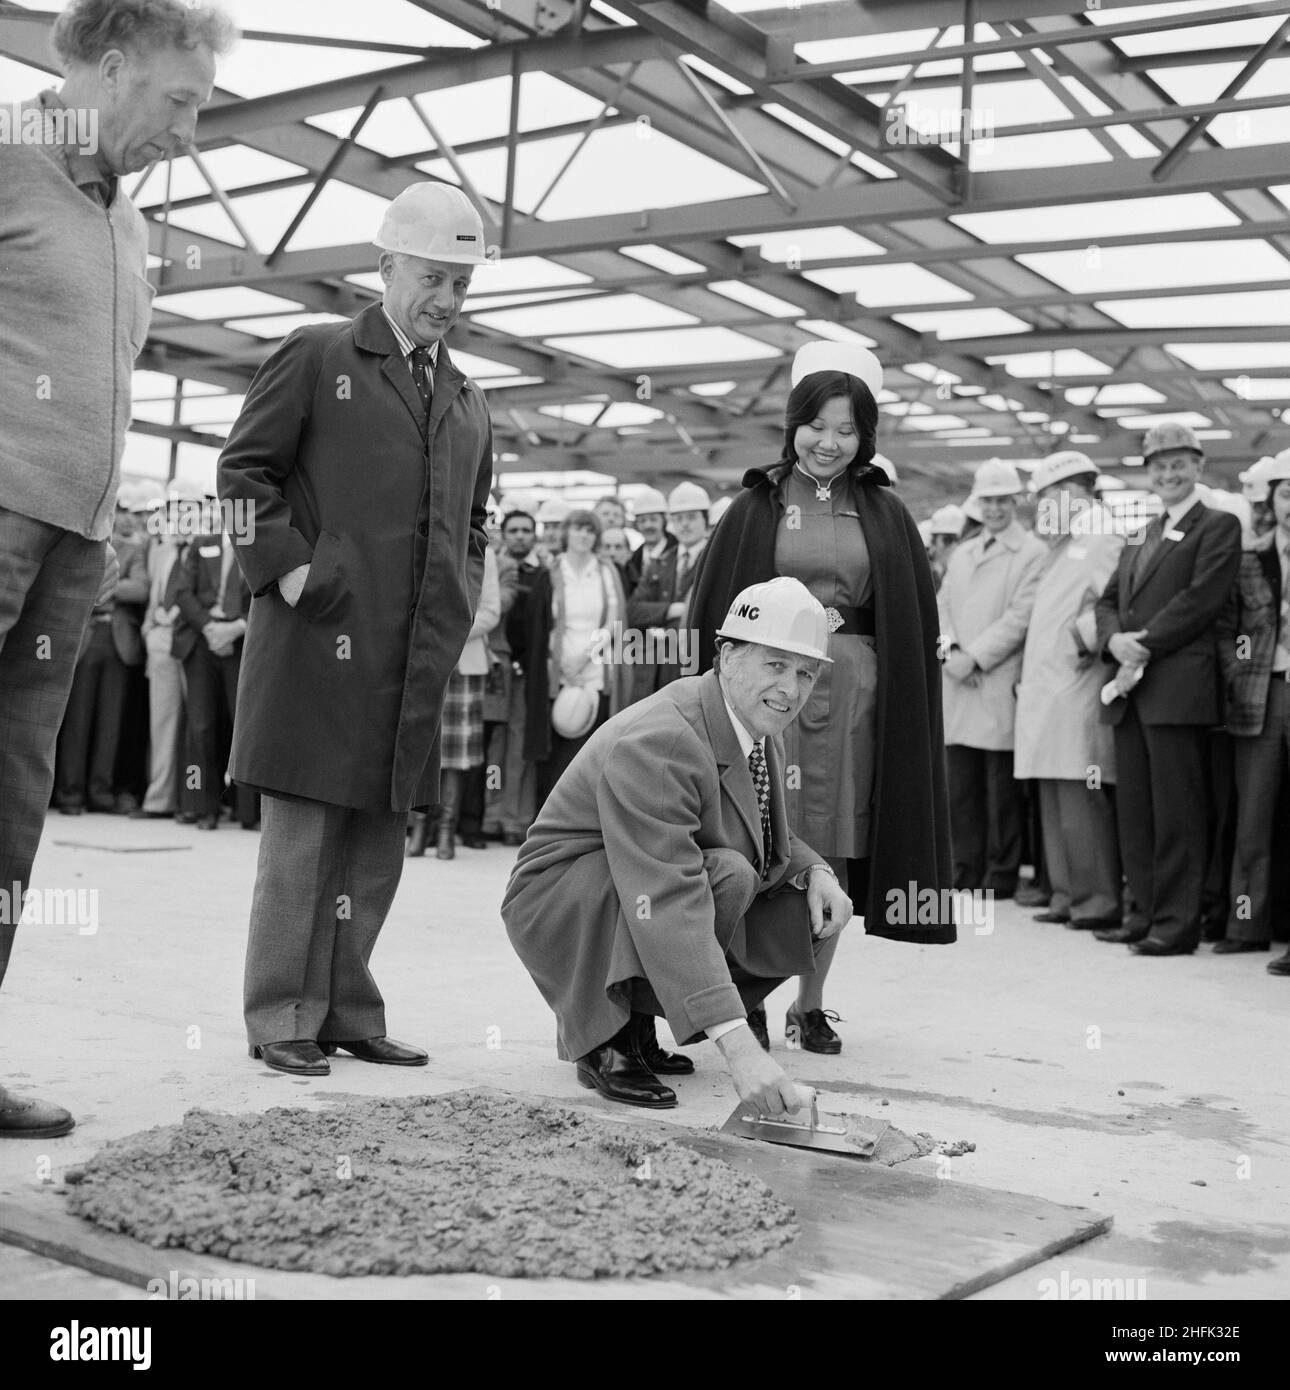 Mayday Hospital, London Road, West Thornton, Croydon, London, 01/05/1981. Denis Sweaney, chairman of Croydon Area Health Authority, using a trowel to smooth the final batch of concrete during the topping out of the services block at Mayday Hospital. Laing&#x2019;s Southern Region was awarded the contract for the first phase of a multi-million pound five phase redevelopment project at Mayday Hospital. The contract included a new three storey surgical block with a linked service block, which was to be connected to the main hospital complex by bridge. The topping out of the services block at Mayd Stock Photo